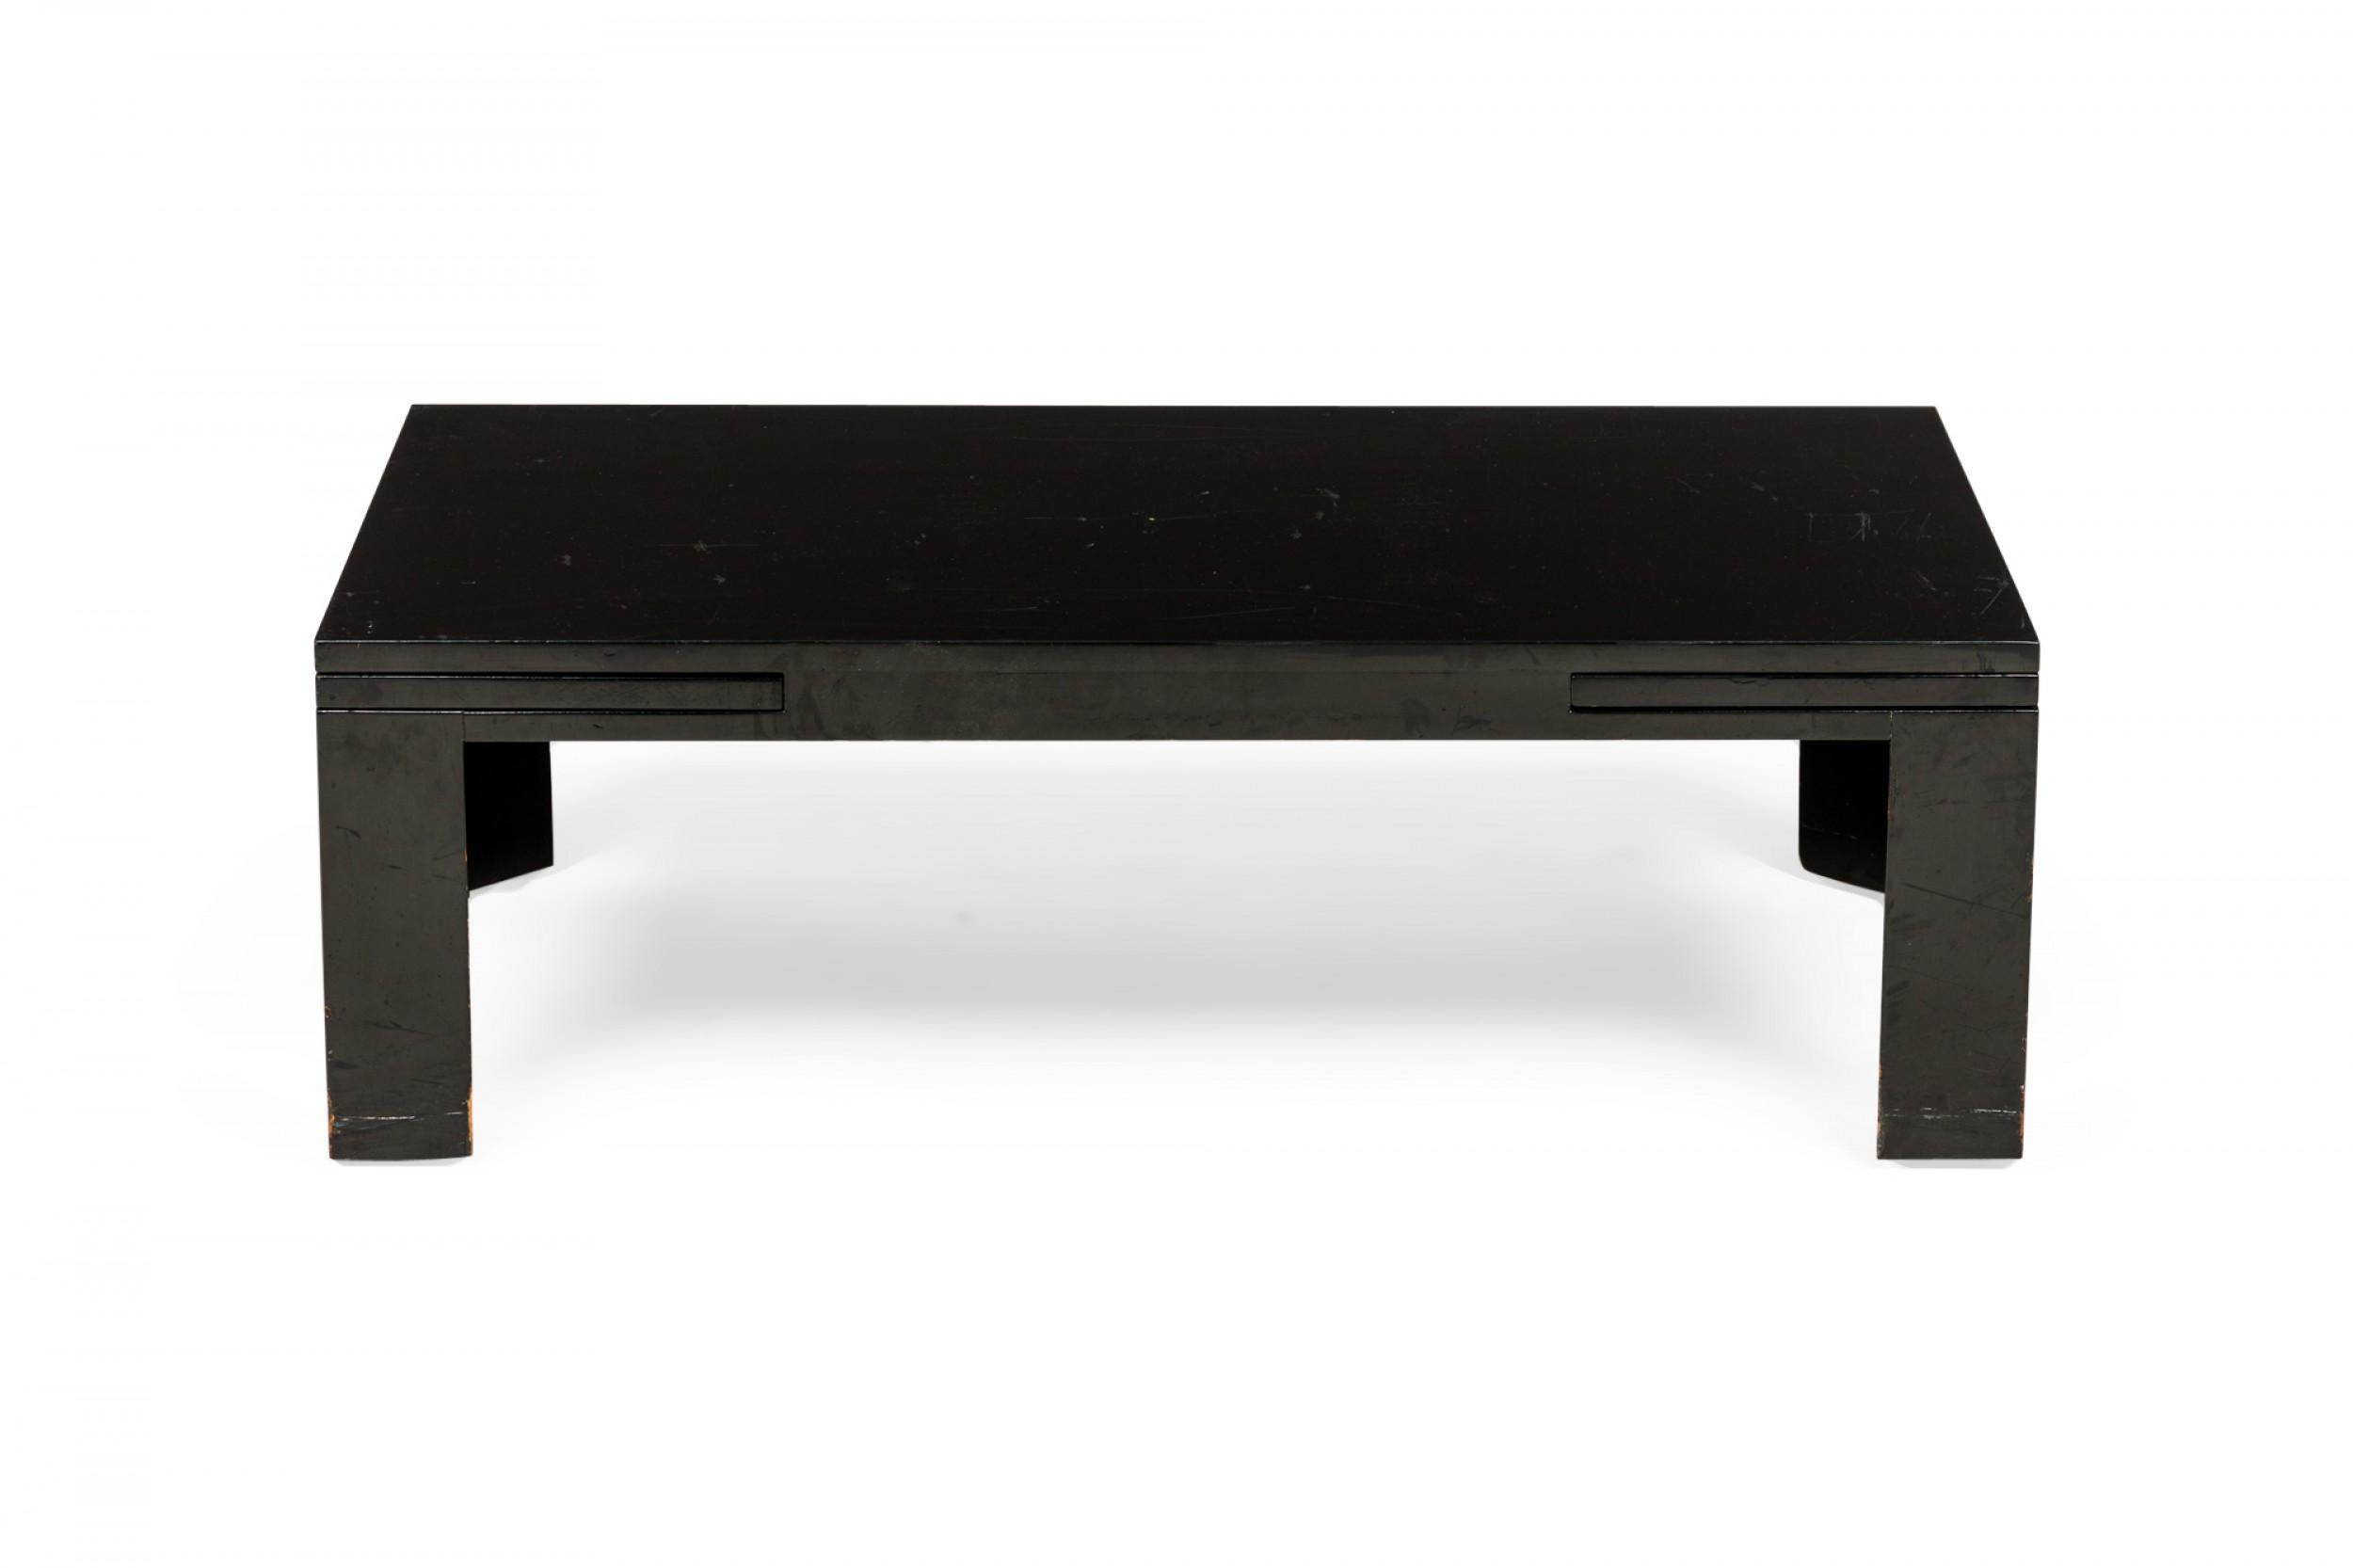 American Mid-Century black painted wooden refectory coffee / cocktail table with a rectangular top and two concealed pull out leaves on either side. (EDWARD WORMLEY FOR DUNBAR FURNITURE COMPANY).